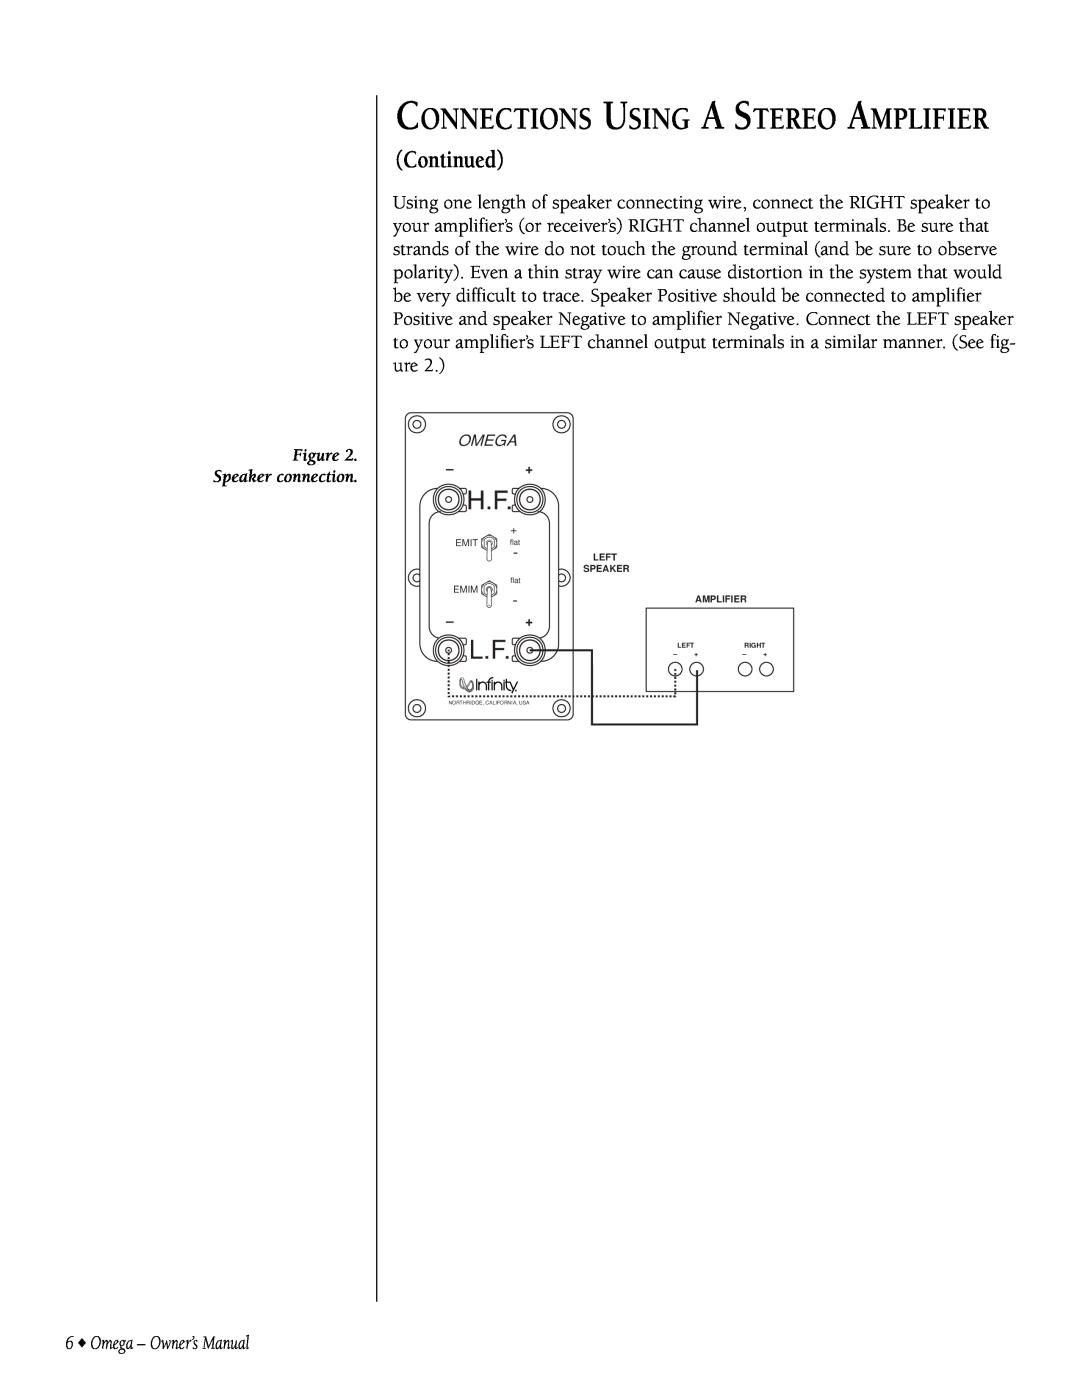 Infiniti 9301297-001 owner manual Connections Using A Stereo Amplifier, Continued 